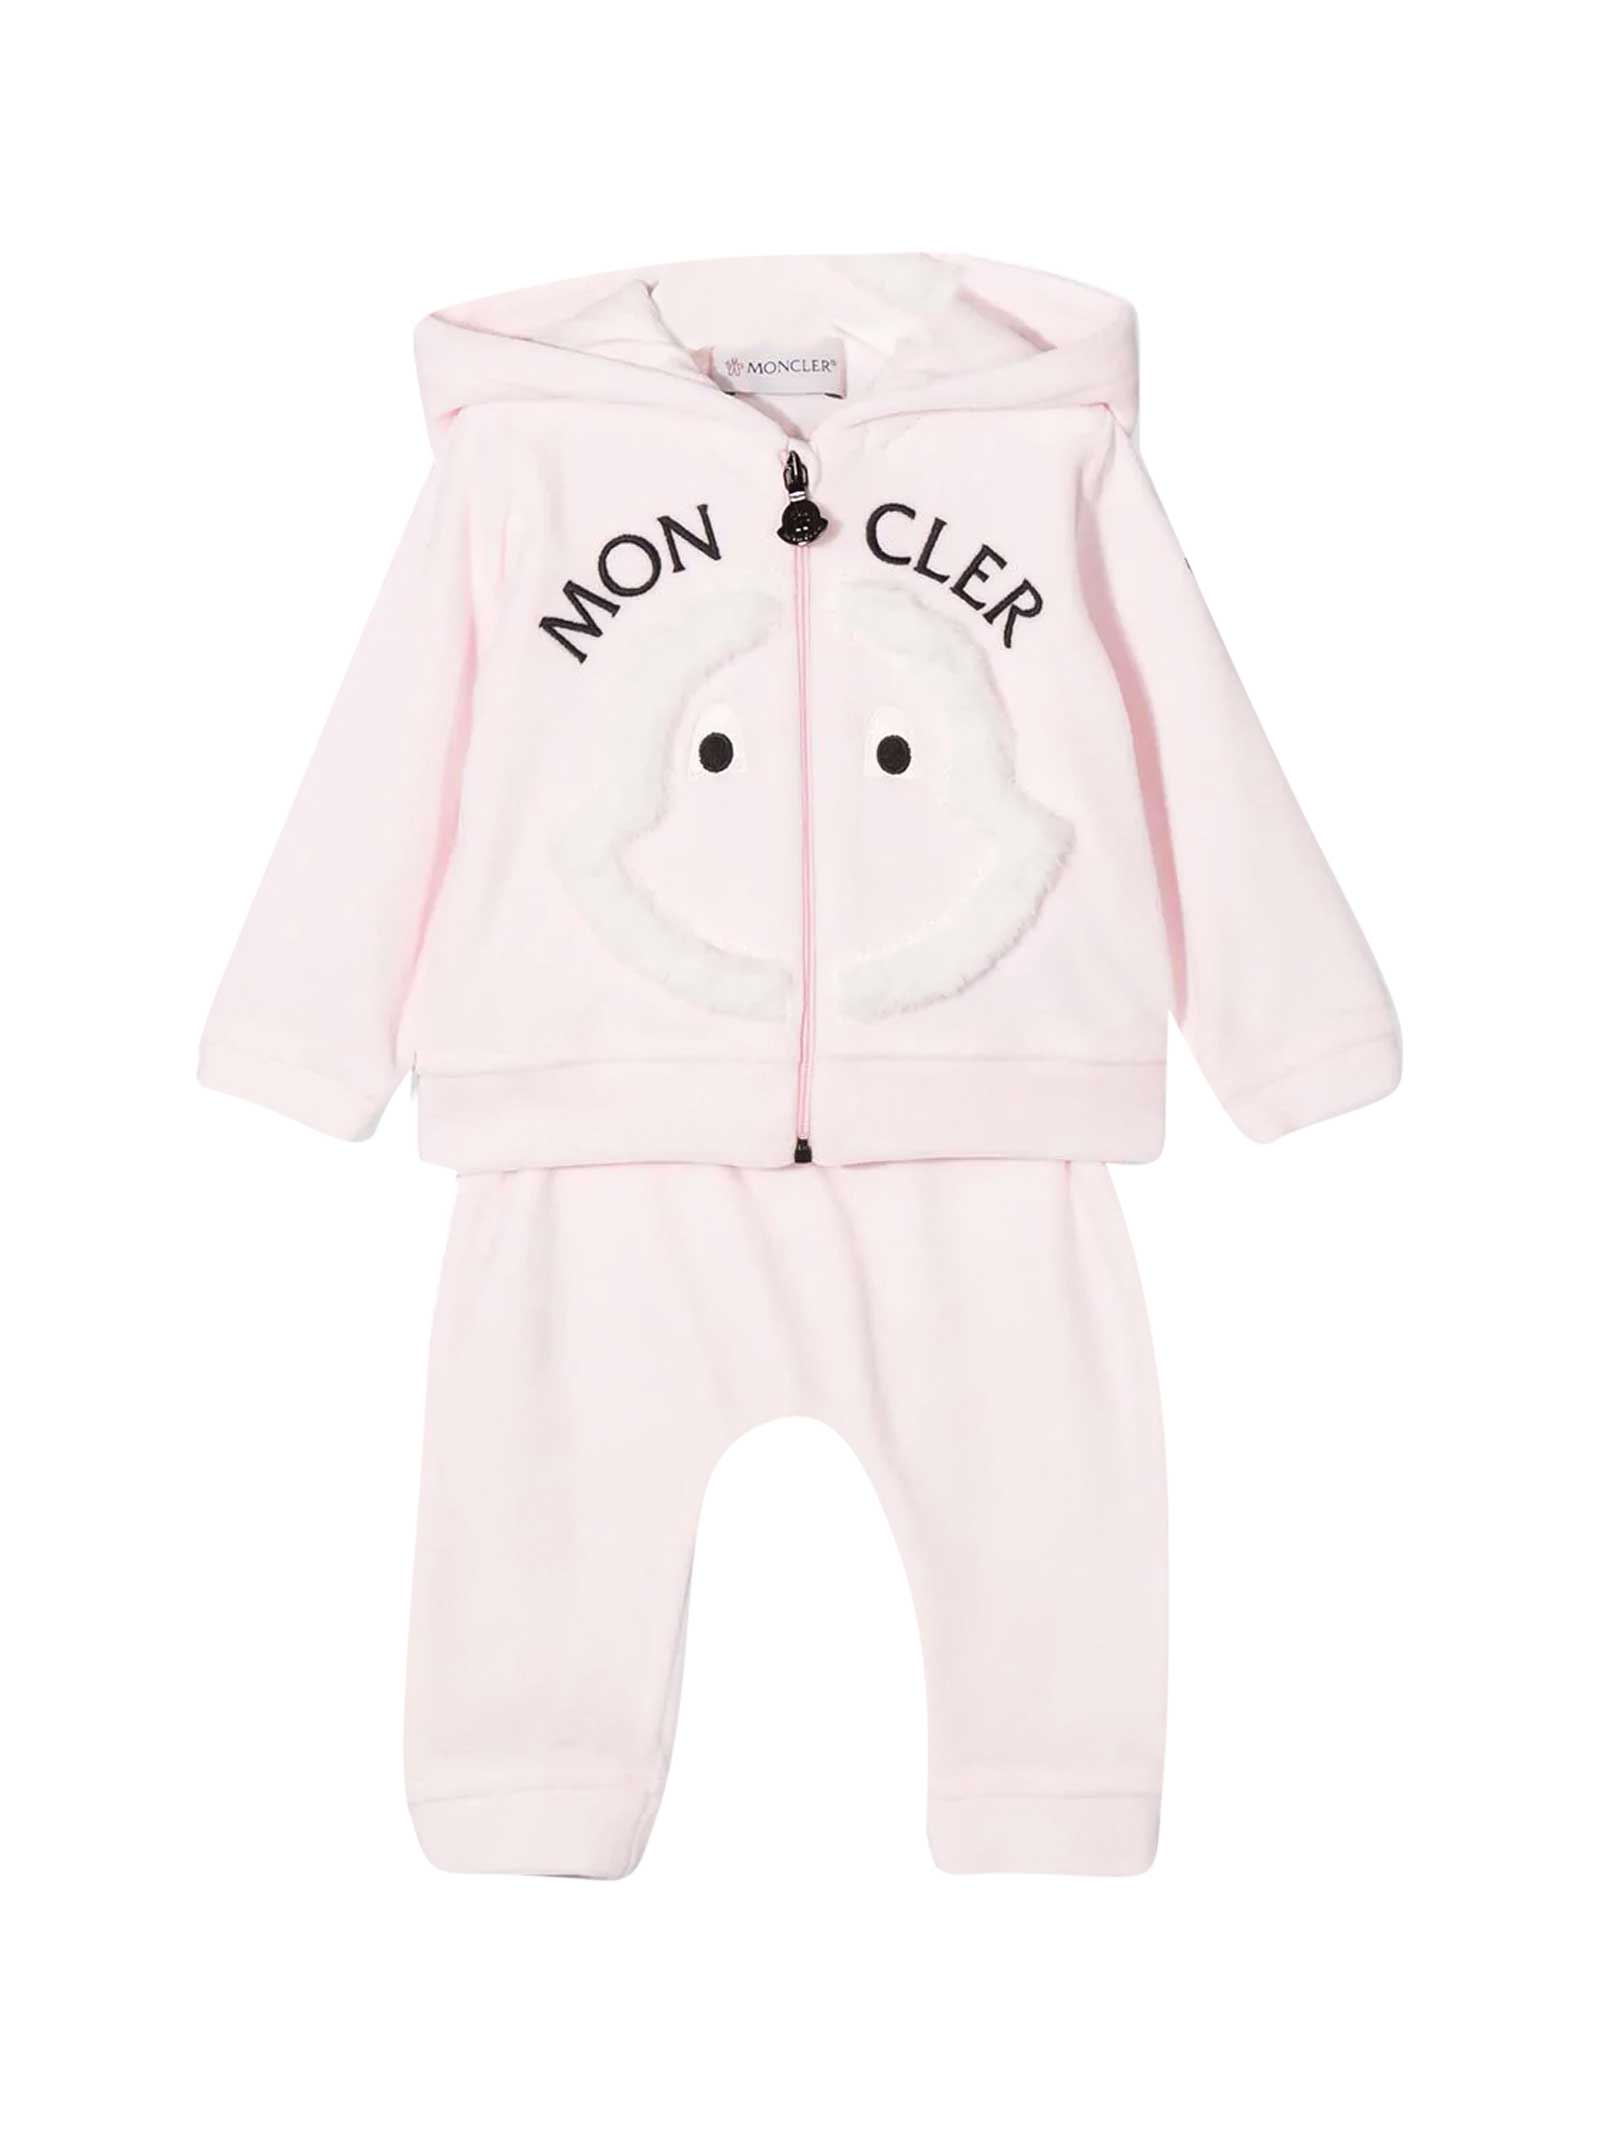 pink baby suit